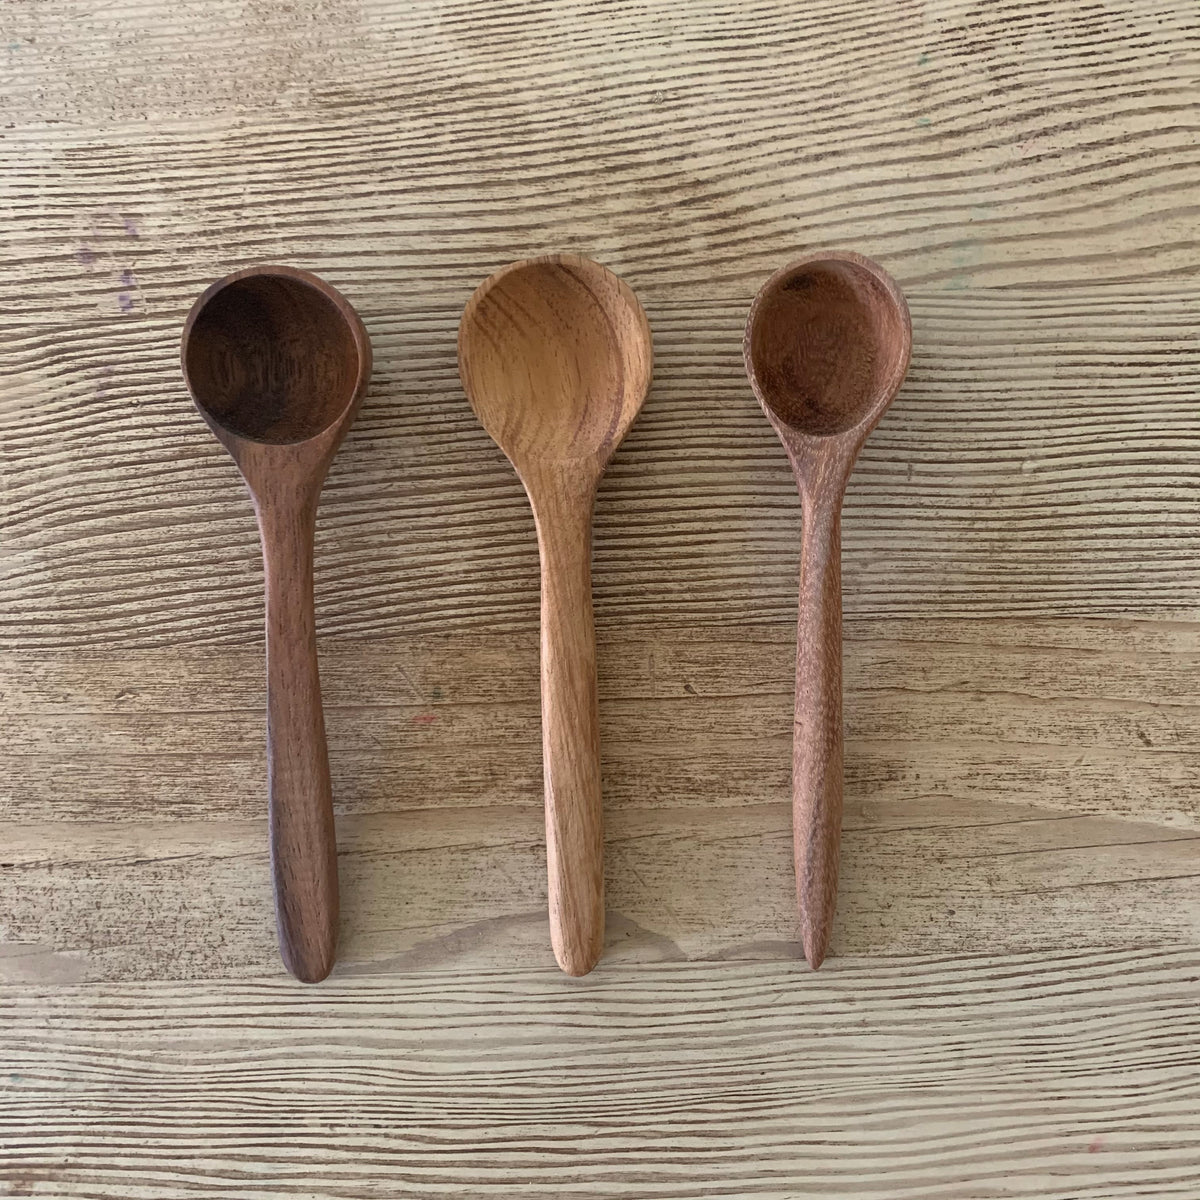 Handmade Wooden Spoon Hand Carved Wooden Spoon Mixing Spoon 